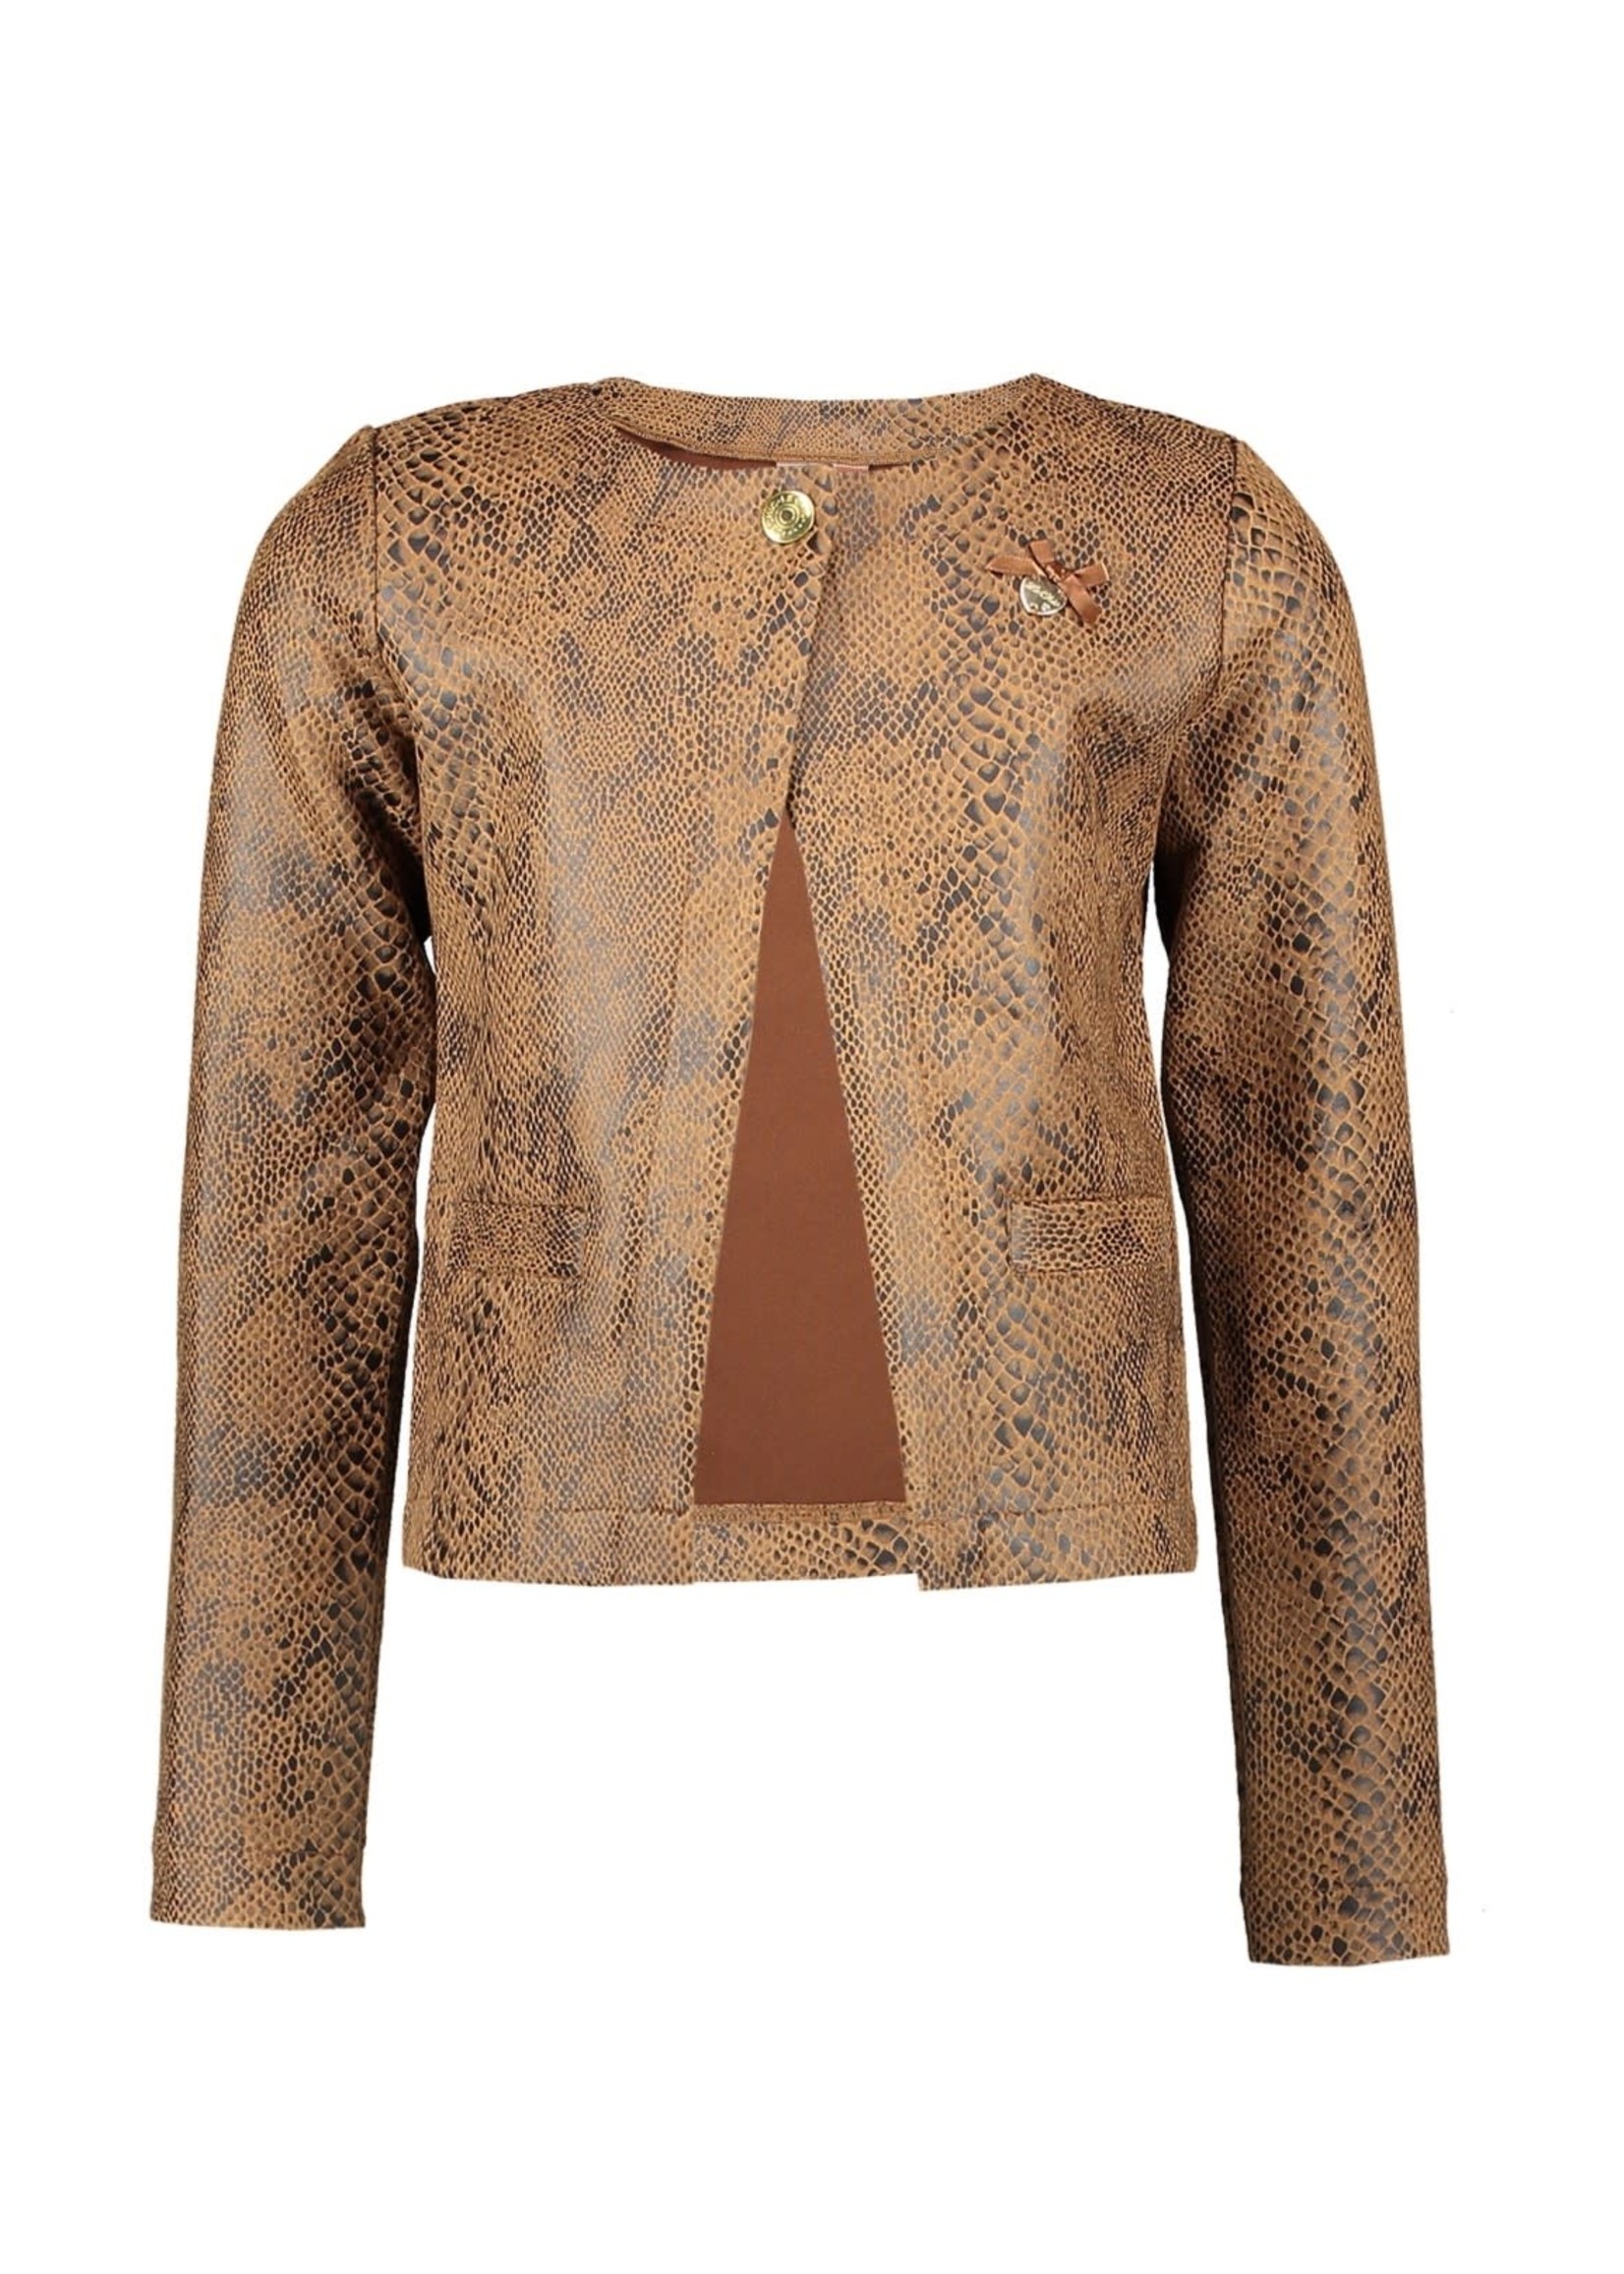 Le Chic Le Chic cardigan snake leather look C008-5125 Cinnamon